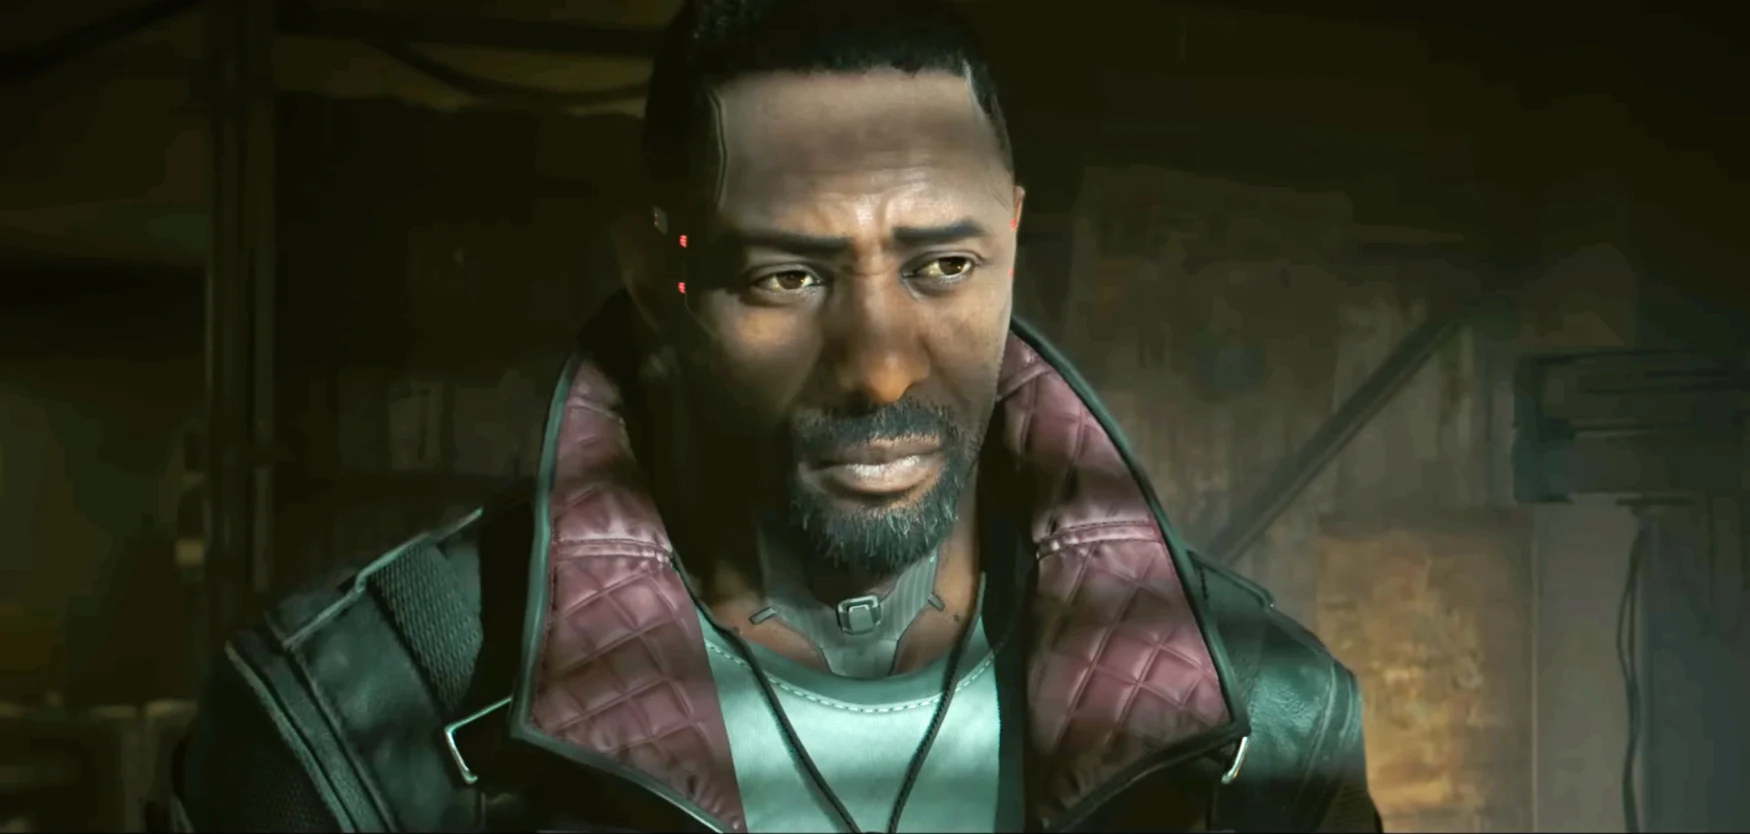 A still from the video game 'Cyberpunk 2077: Phantom Liberty' showing a character modeled after actor Idris Elba.